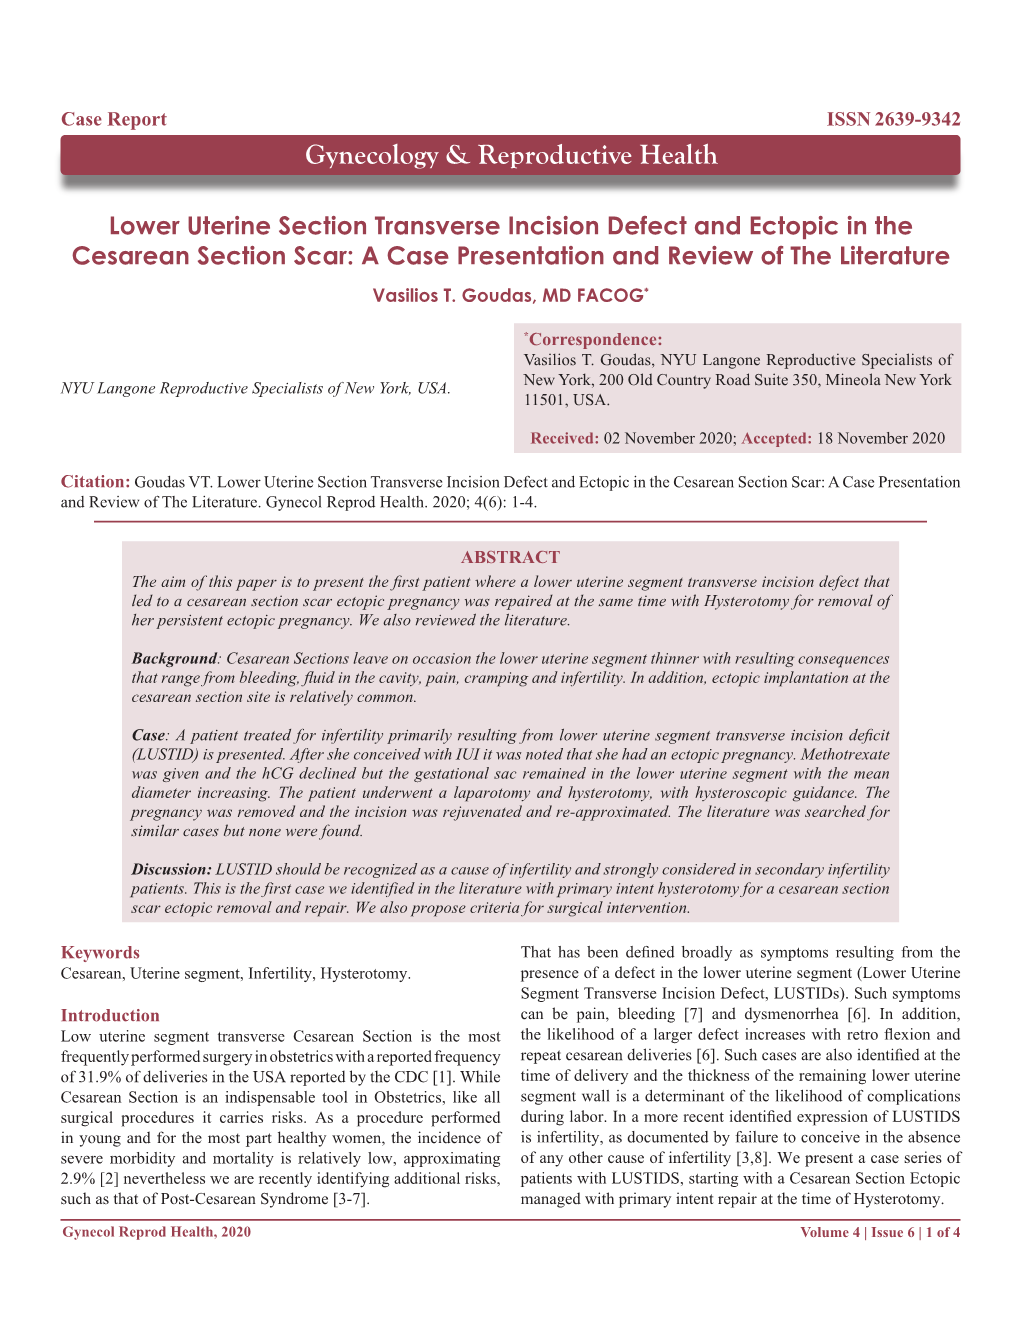 Lower Uterine Section Transverse Incision Defect and Ectopic in the Cesarean Section Scar: a Case Presentation and Review of the Literature Vasilios T